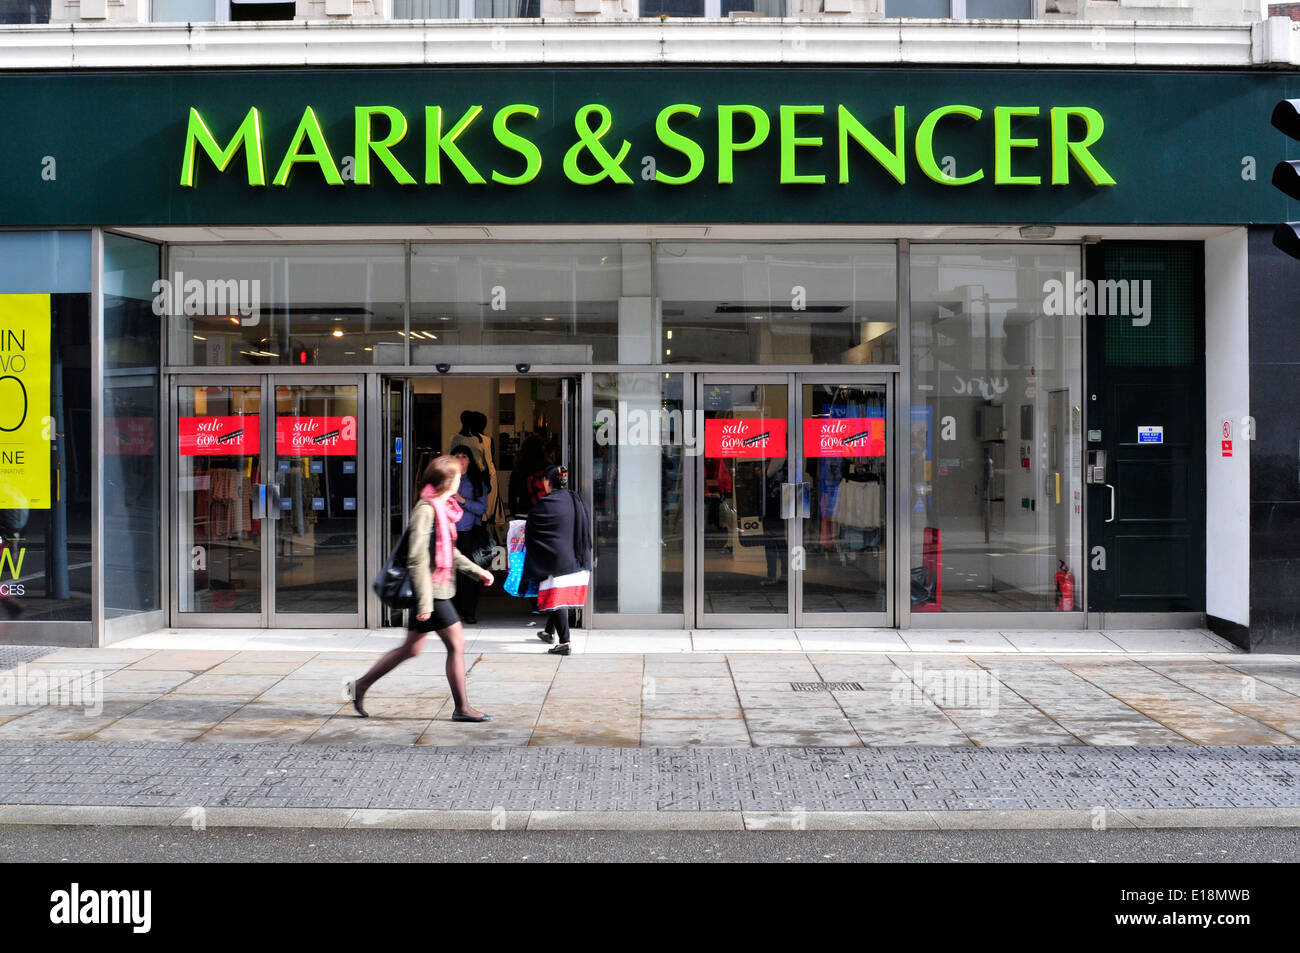 A woman walks in front of Marks & Spencer store, Hammersmith, London, UK Stock Photo